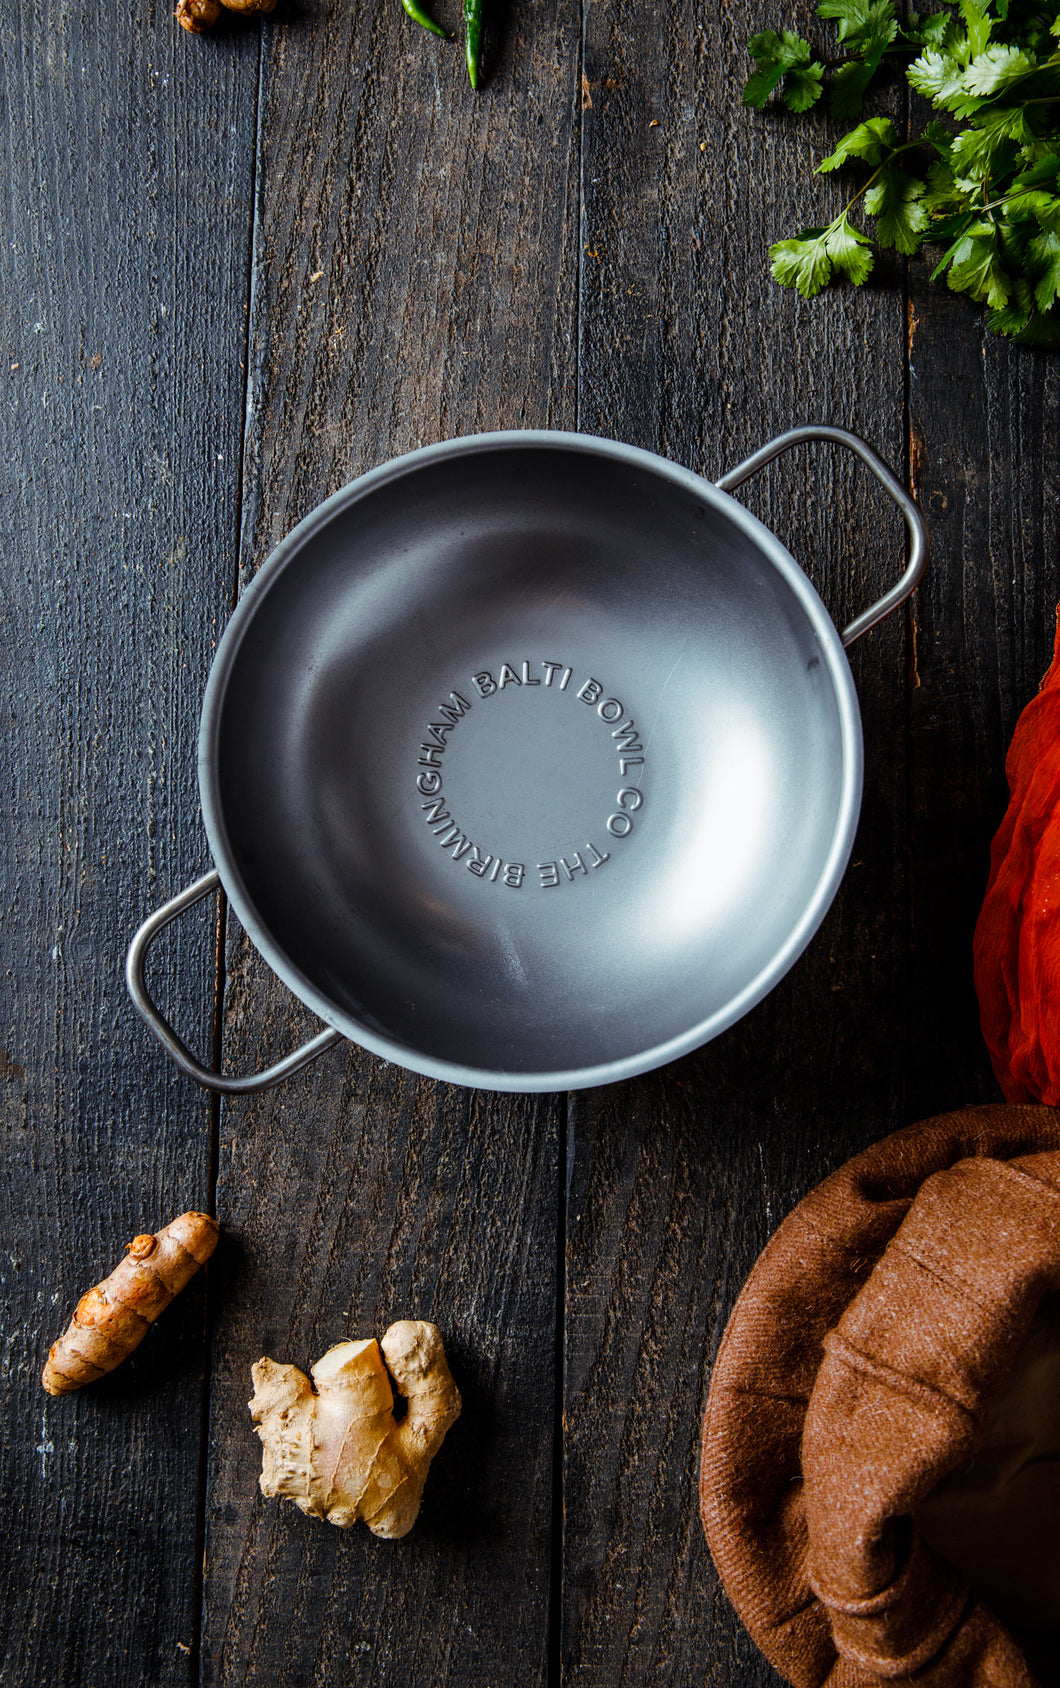 Authentic Balti Bowl gift for curry lovers made in Birmingham – The  Birmingham Balti Bowl Co.